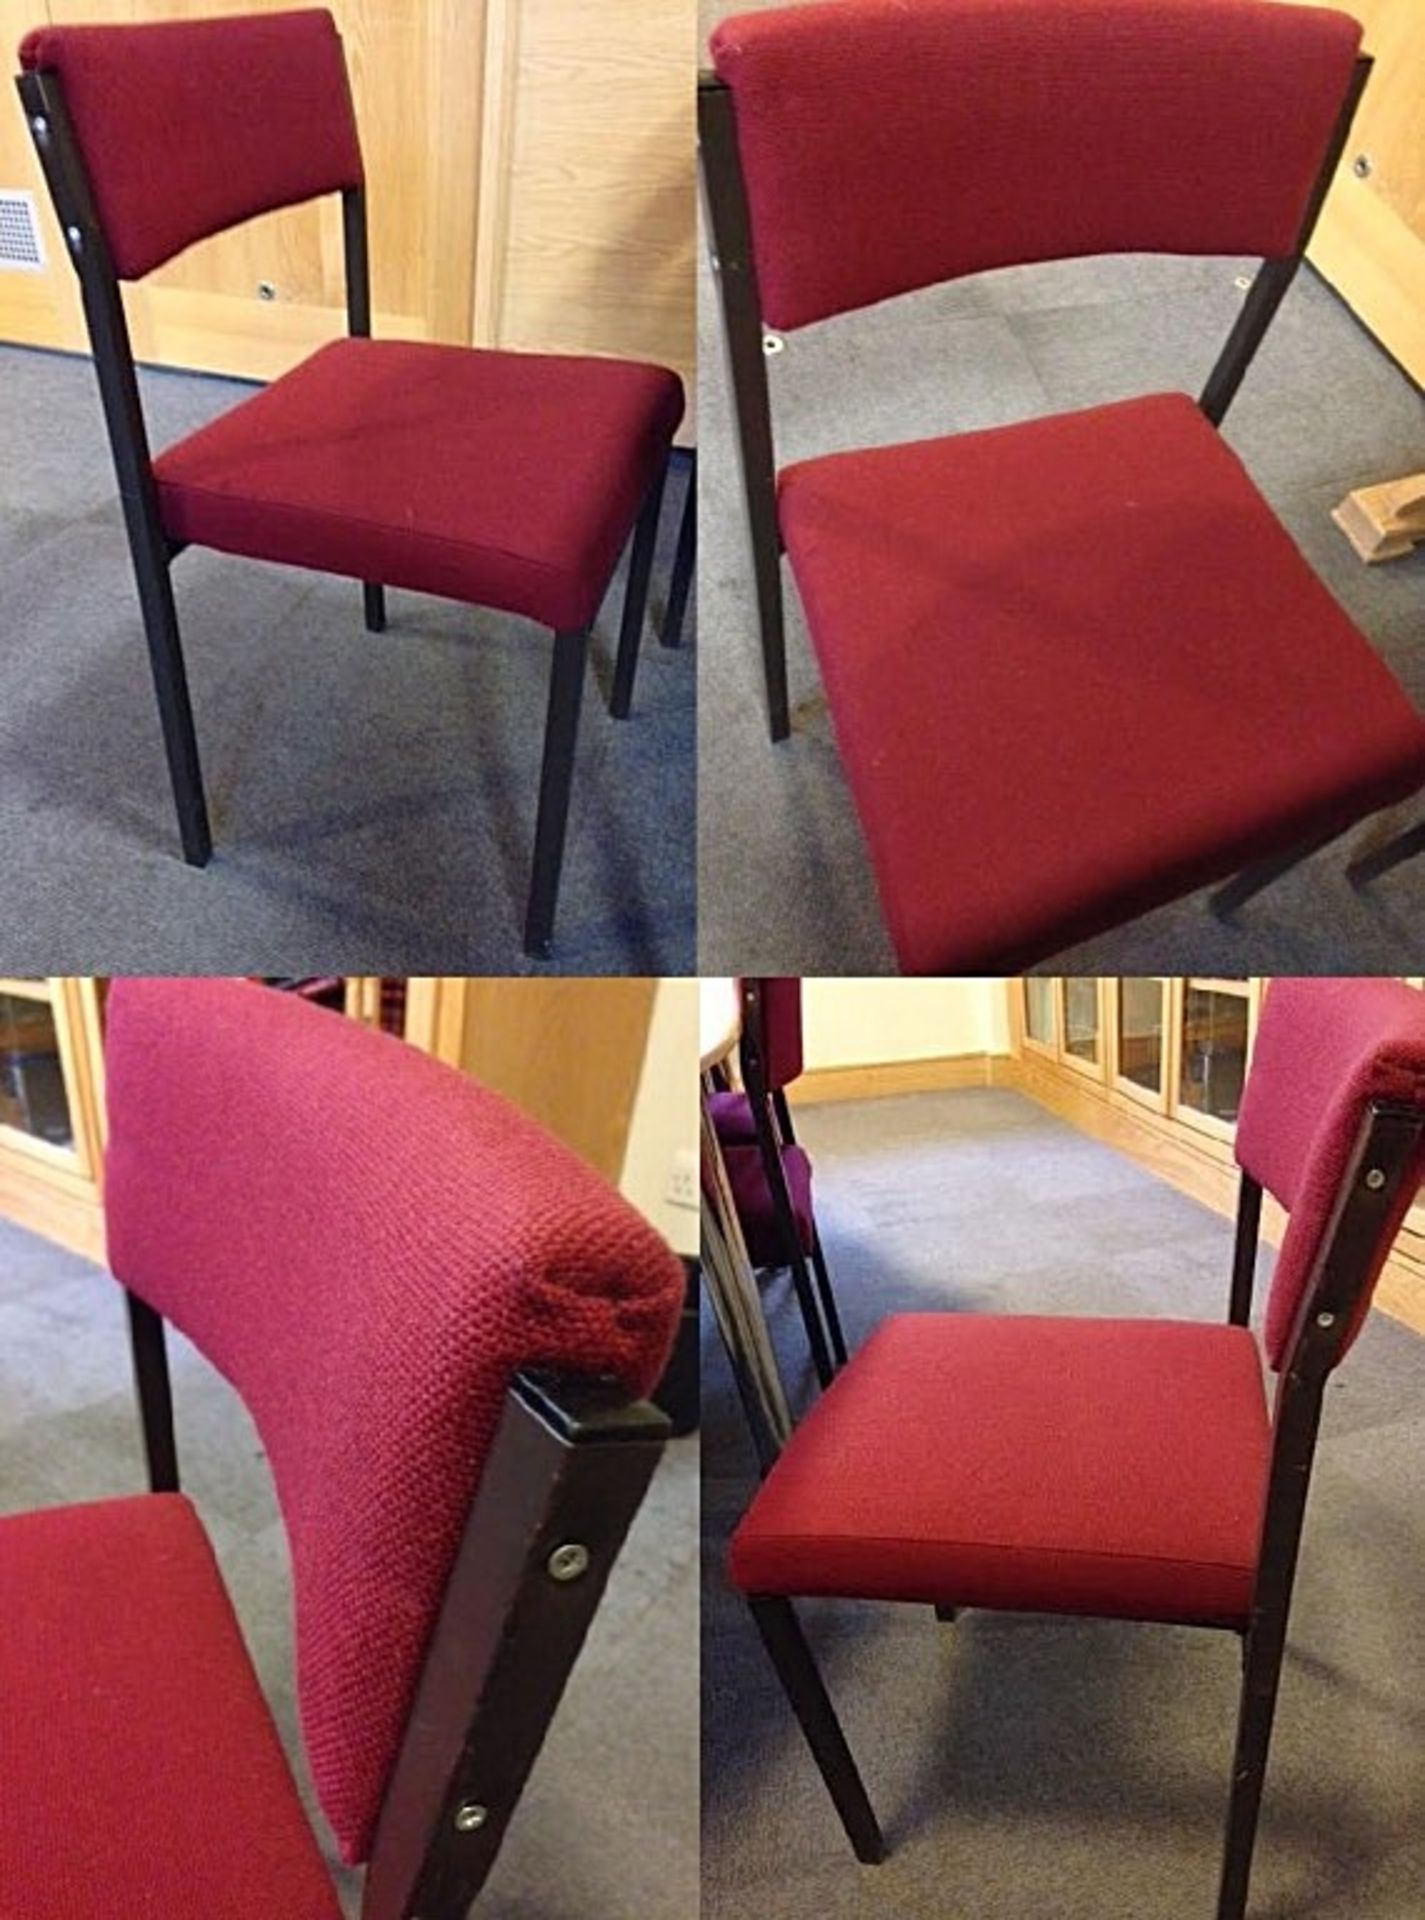 10 x Stacking Chairs - Burgundy Fabric - All In Good Condition - General Purpose Stacking Chairs For